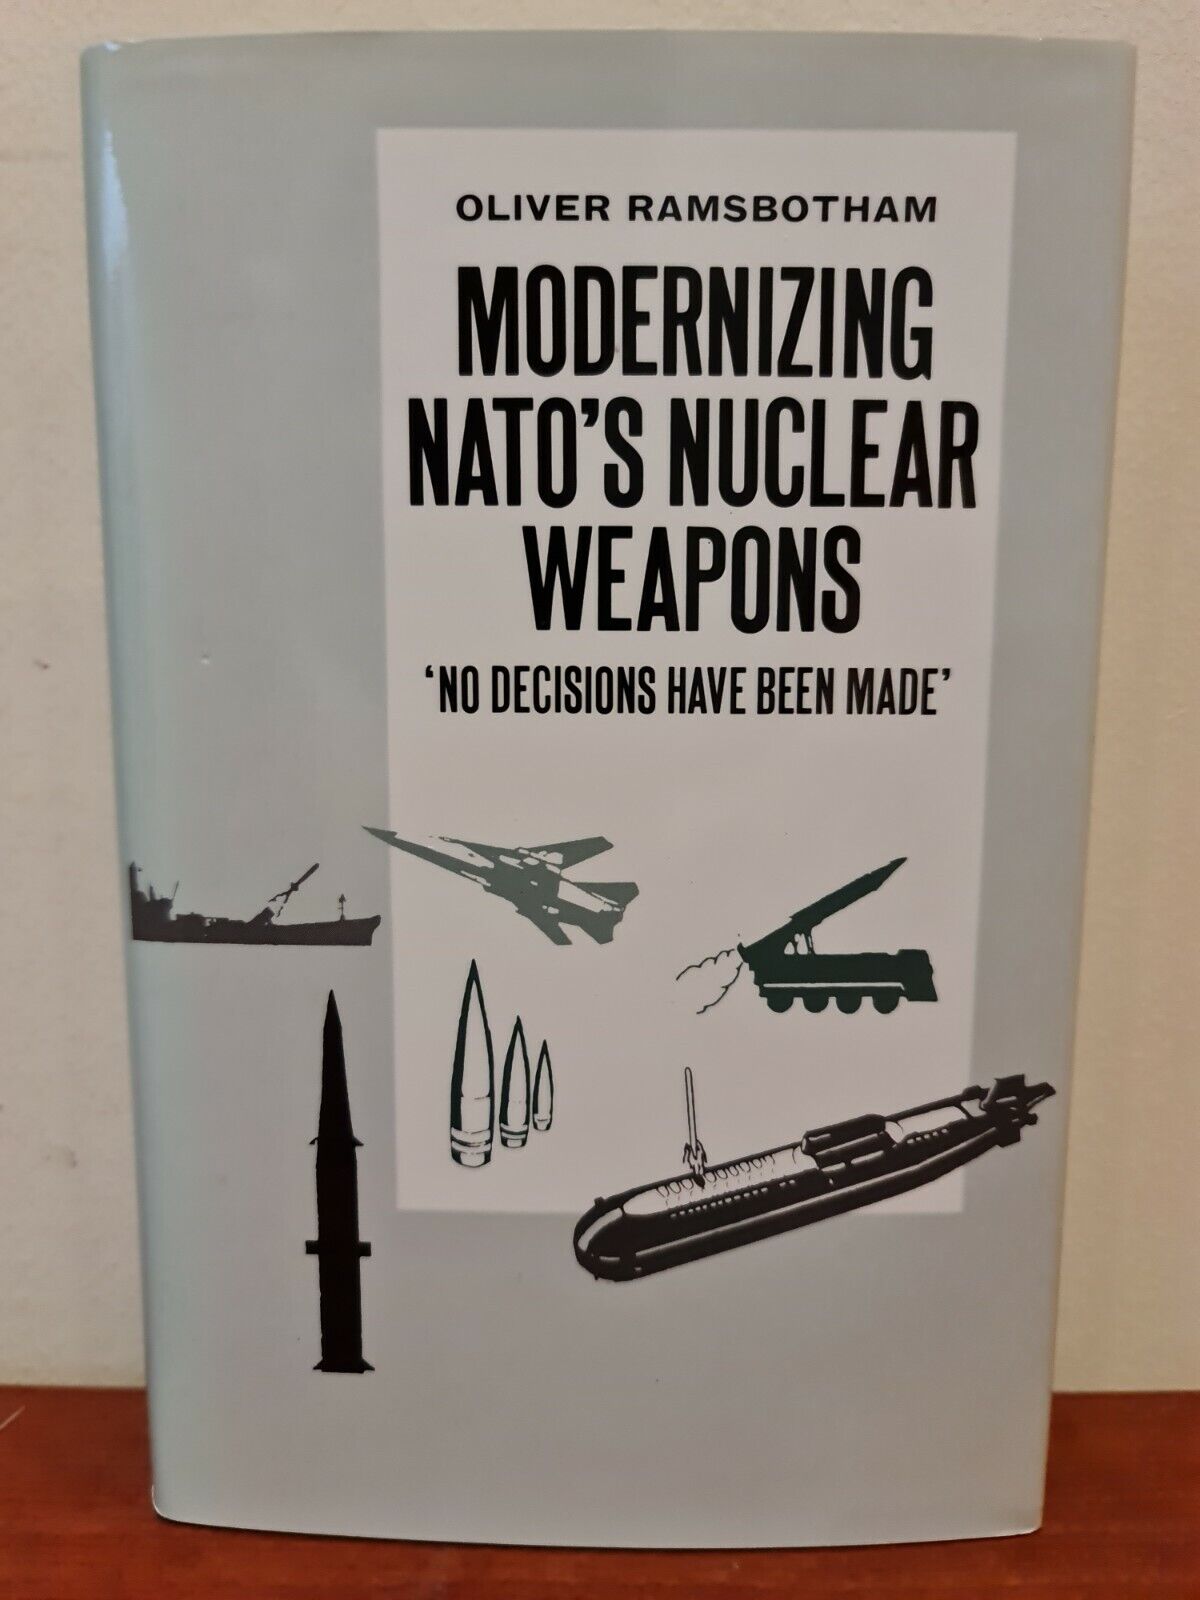 Modernizing NATO's Nuclear Weapons by Oliver Ramsbotham (1989)